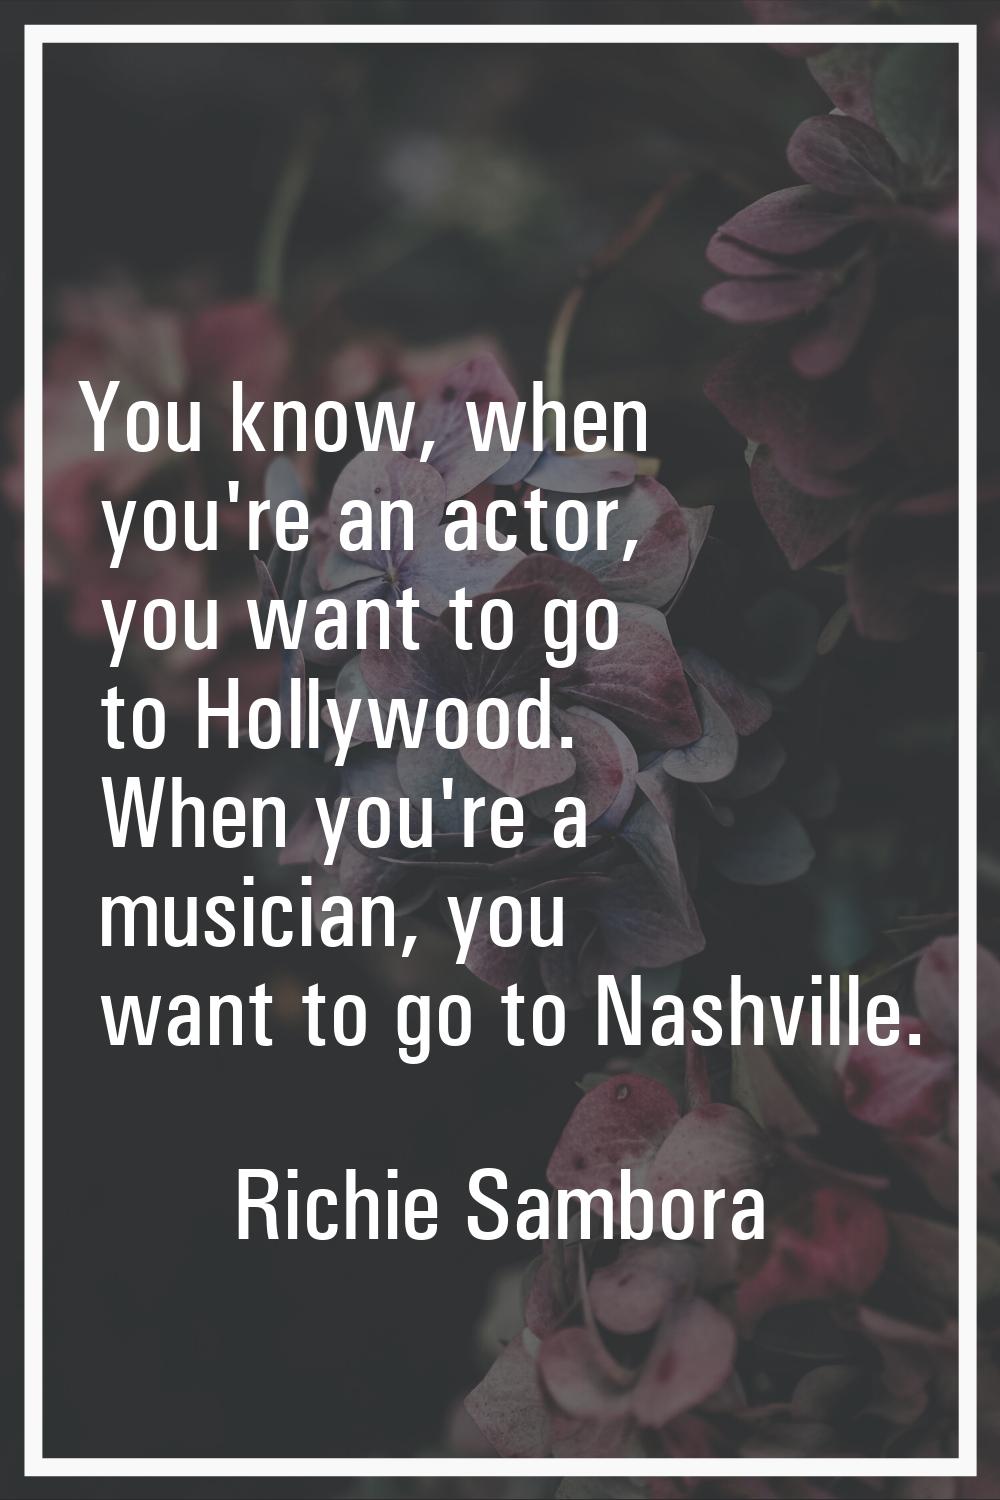 You know, when you're an actor, you want to go to Hollywood. When you're a musician, you want to go